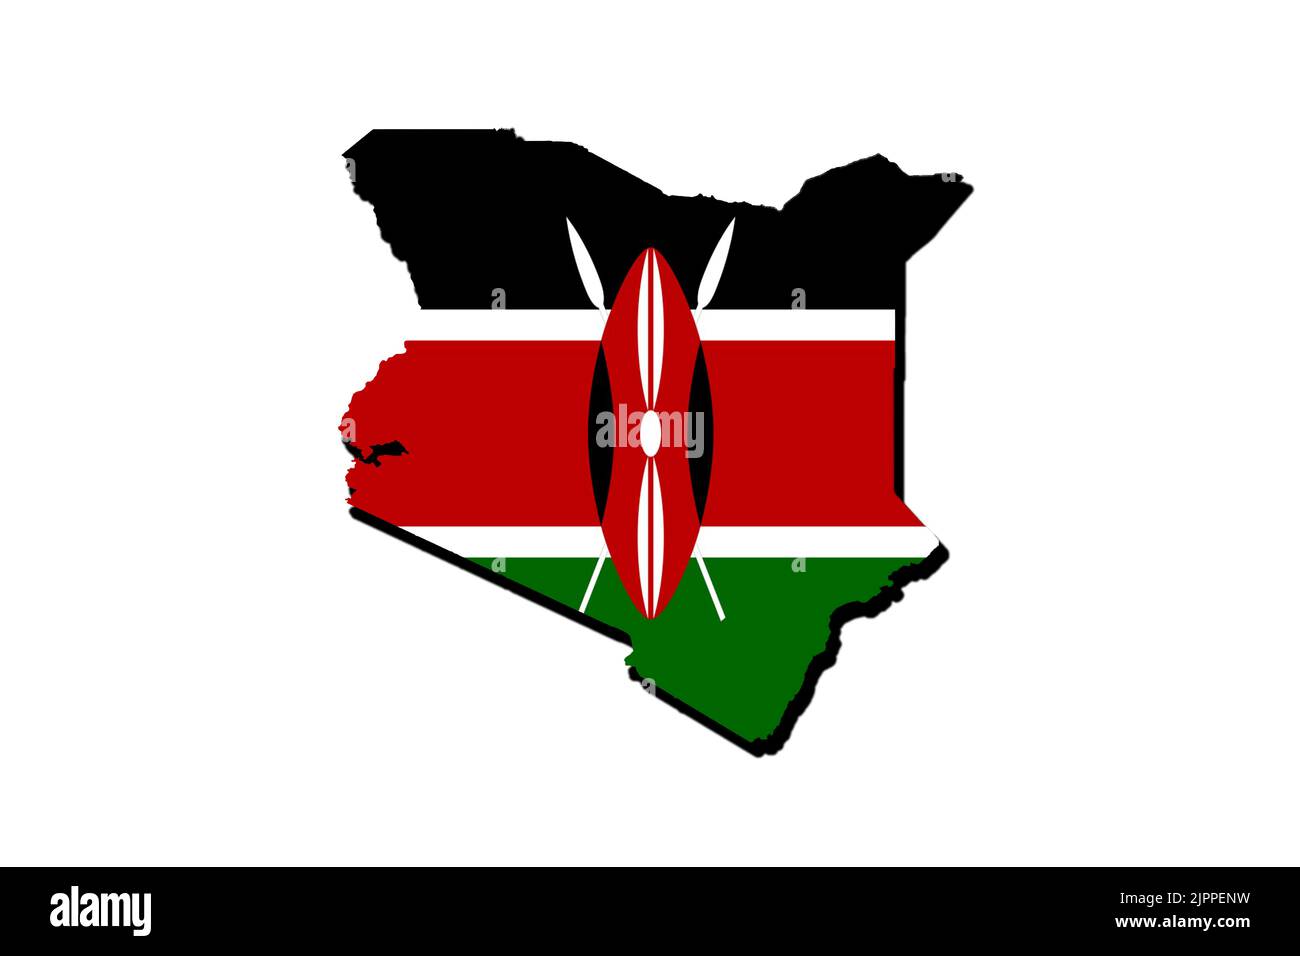 Silhouette of the map of Kenya with its flag Stock Photo